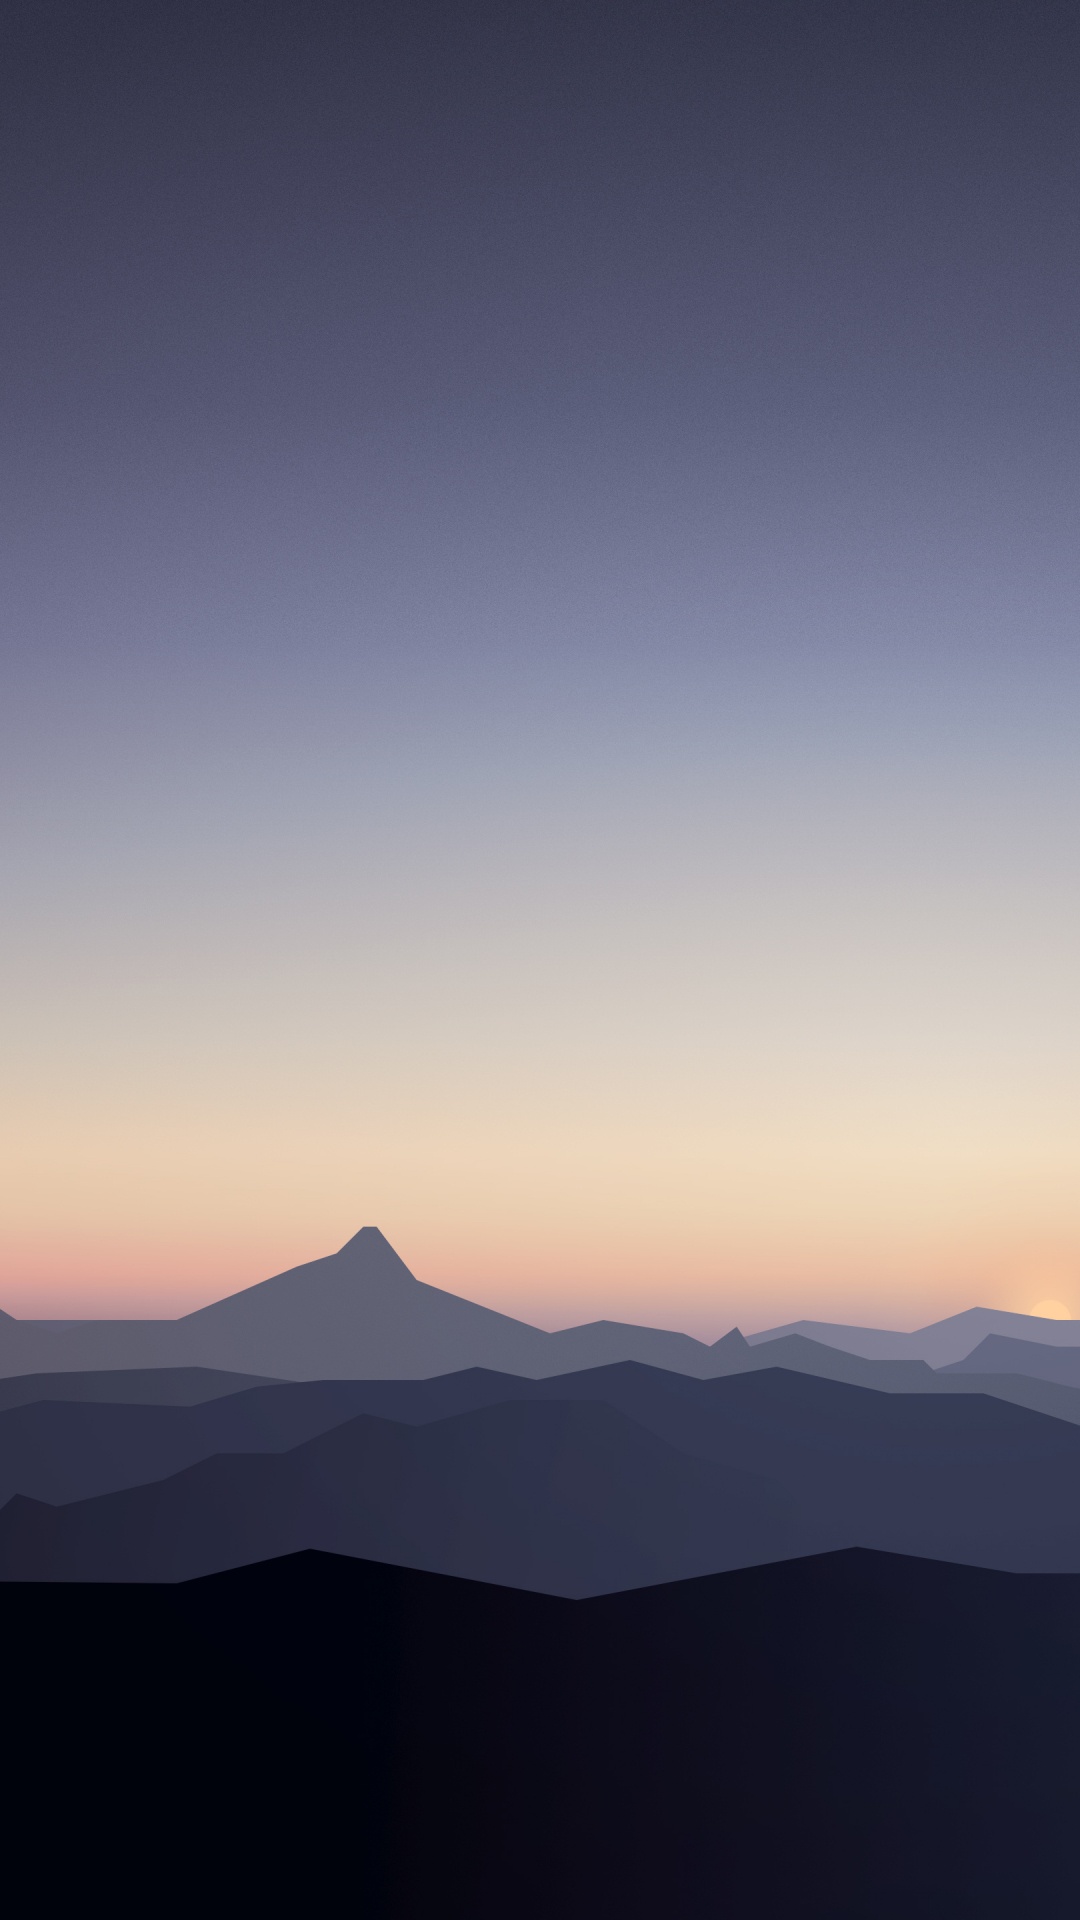 Silhouette of Mountains During Sunset. Wallpaper in 1080x1920 Resolution